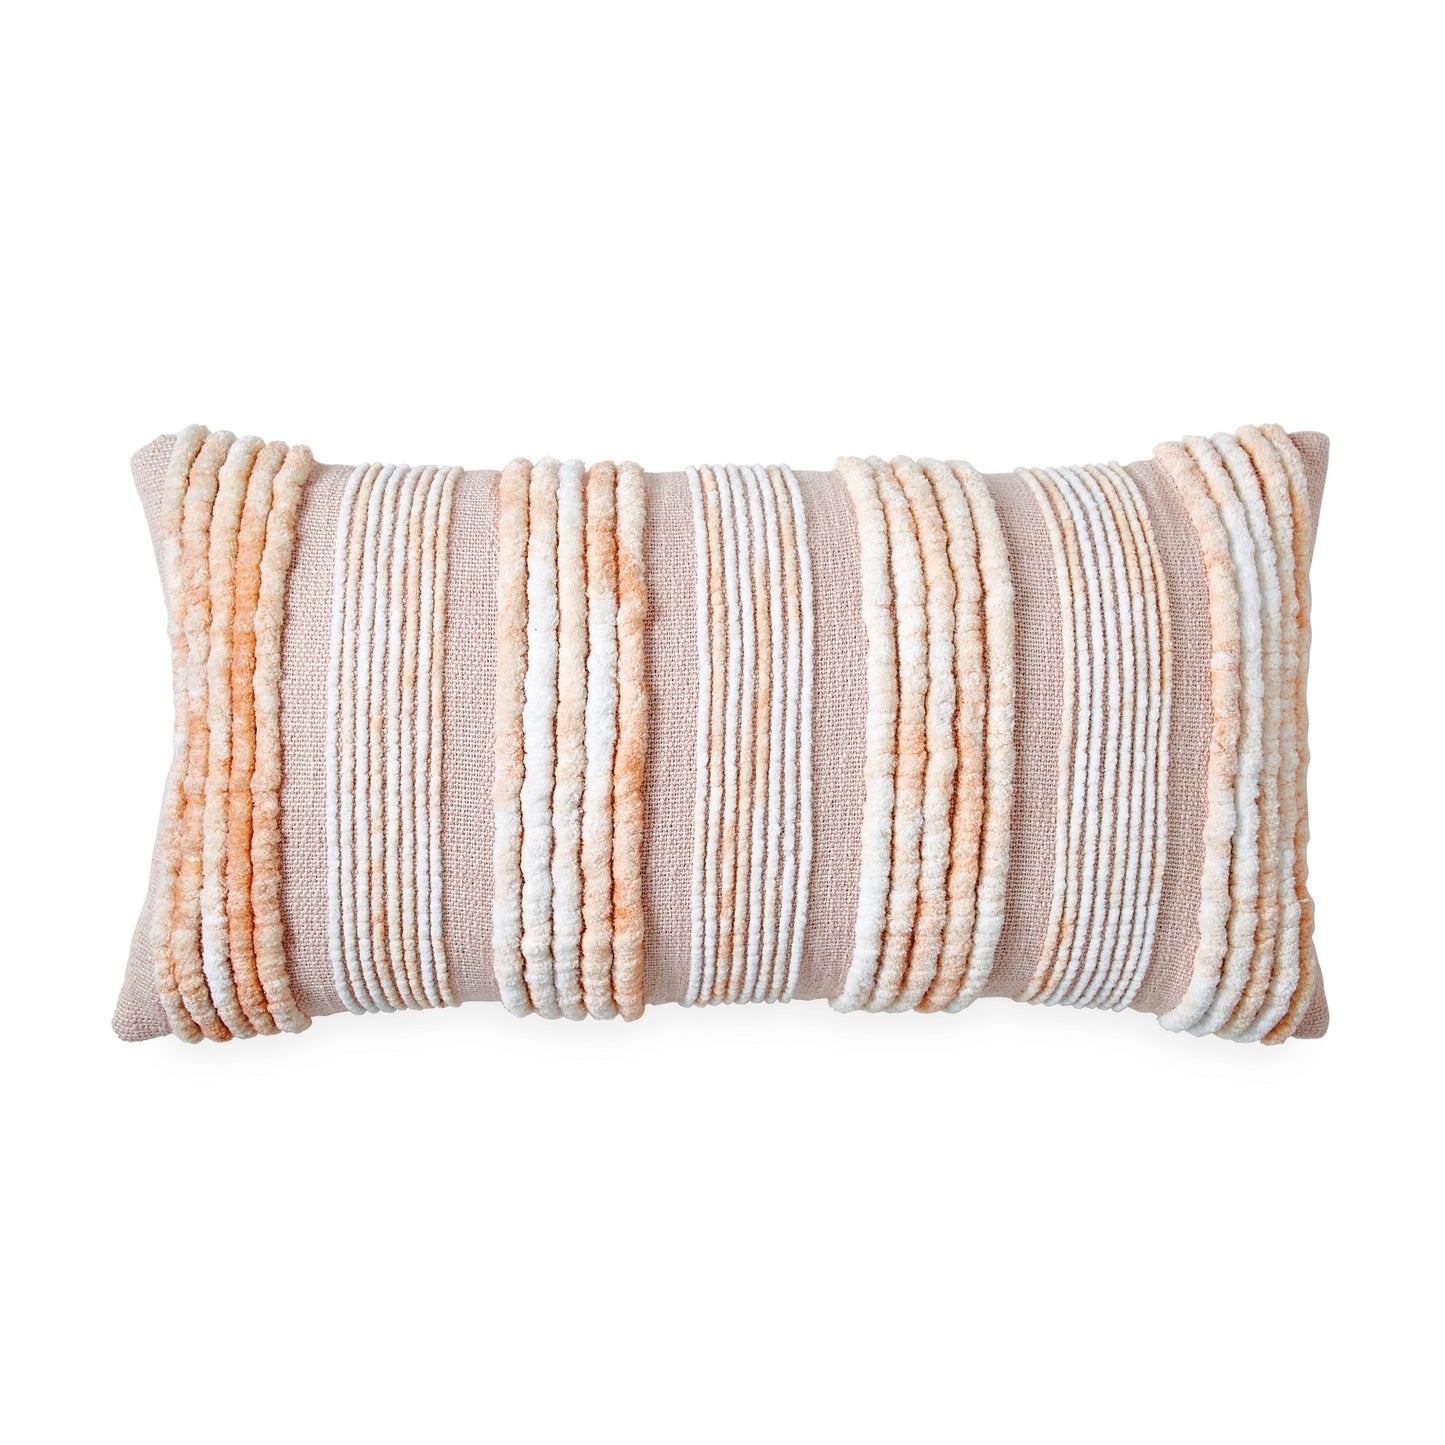 Peri Home Space-Dyed Tufted Decorative Pillow